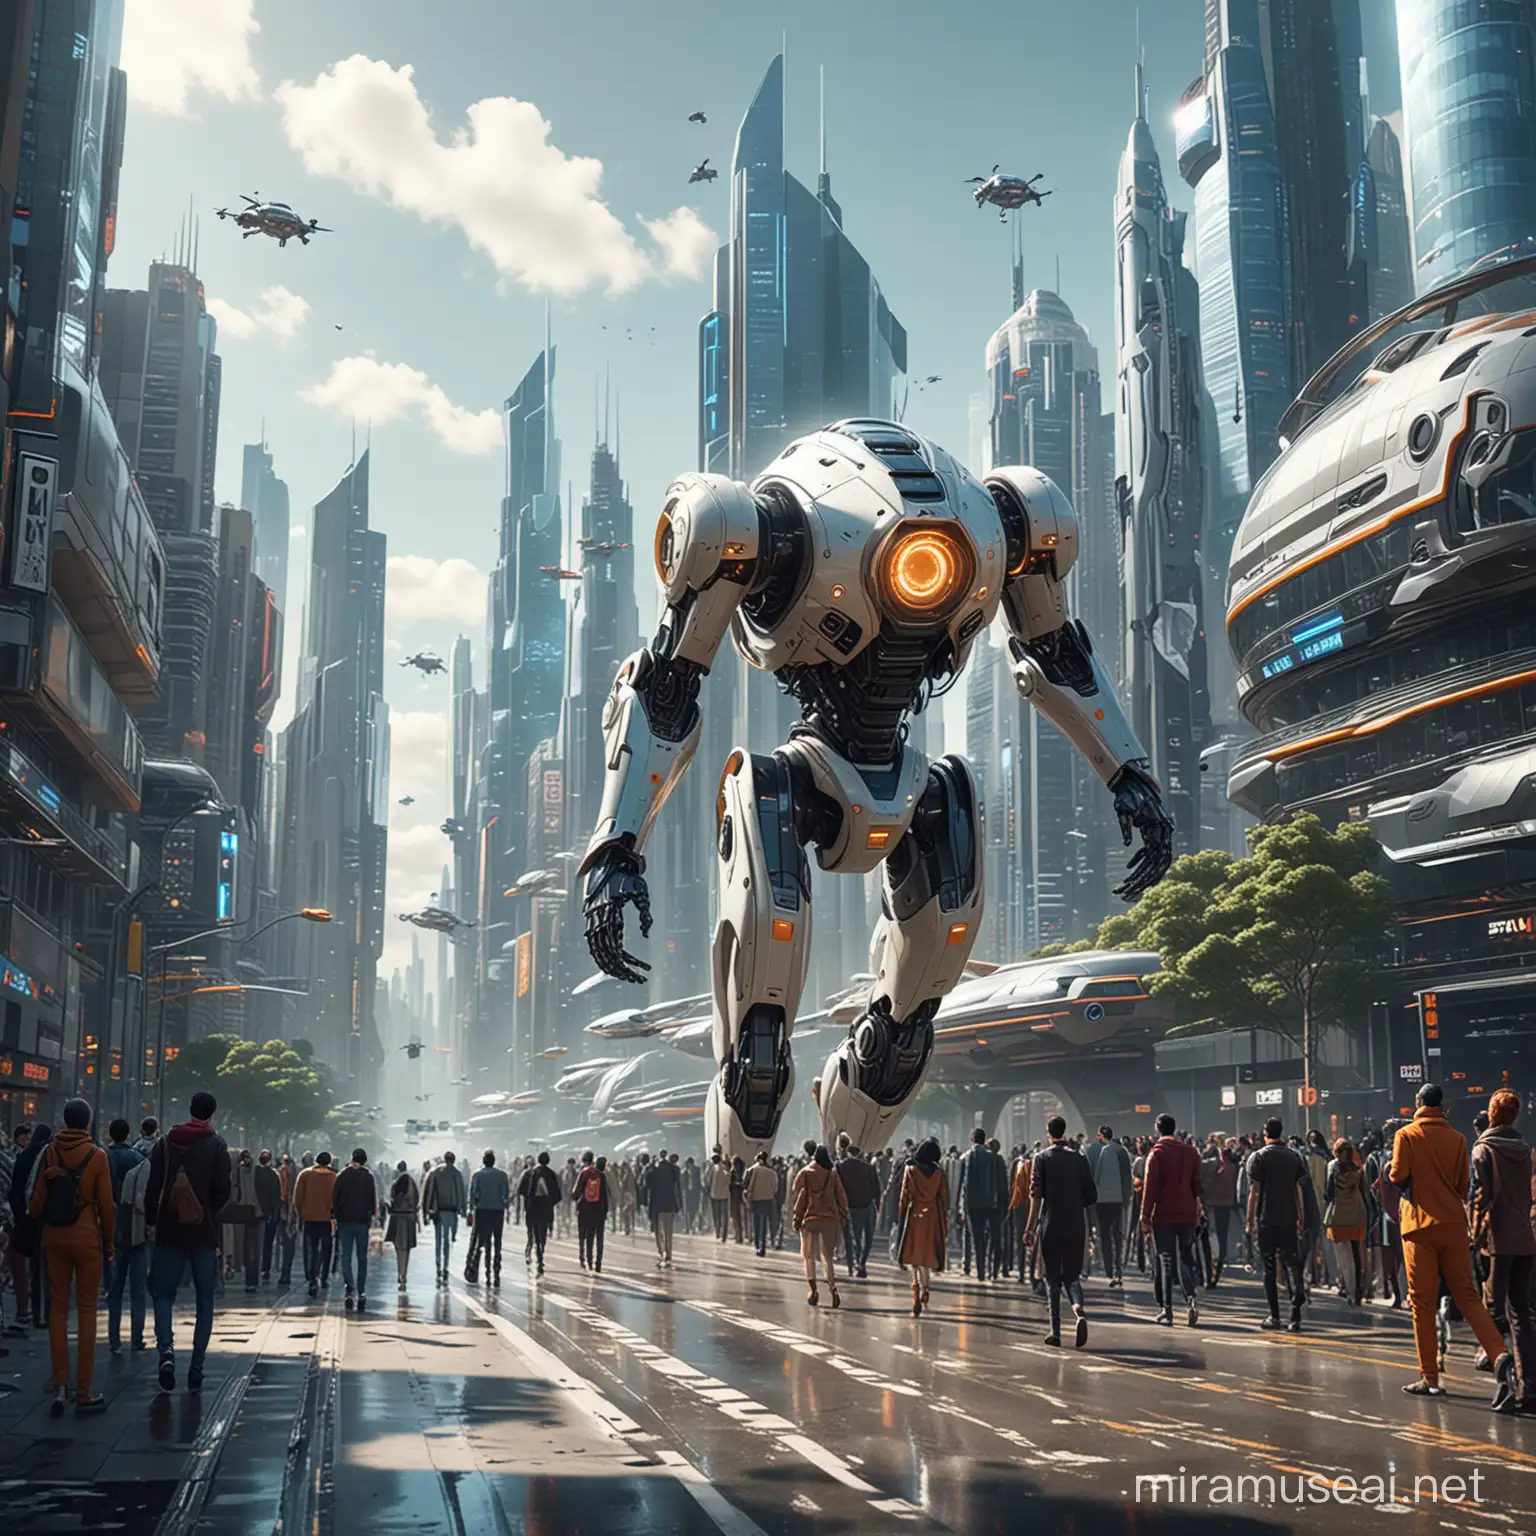 A futuristic cityscape in the year 3,000, with a diverse crowd of people and robots walking in front of a camera, to see their bodies and faces. The people are dressed in stylish high-tech attire, while the robots are of advanced humanoid design. The background shows imposing ultra-modern buildings with elegant curved designs and vibrant color schemes. Flying cars streak across the sky, adding dynamism to the scene. 3d render, cinematic